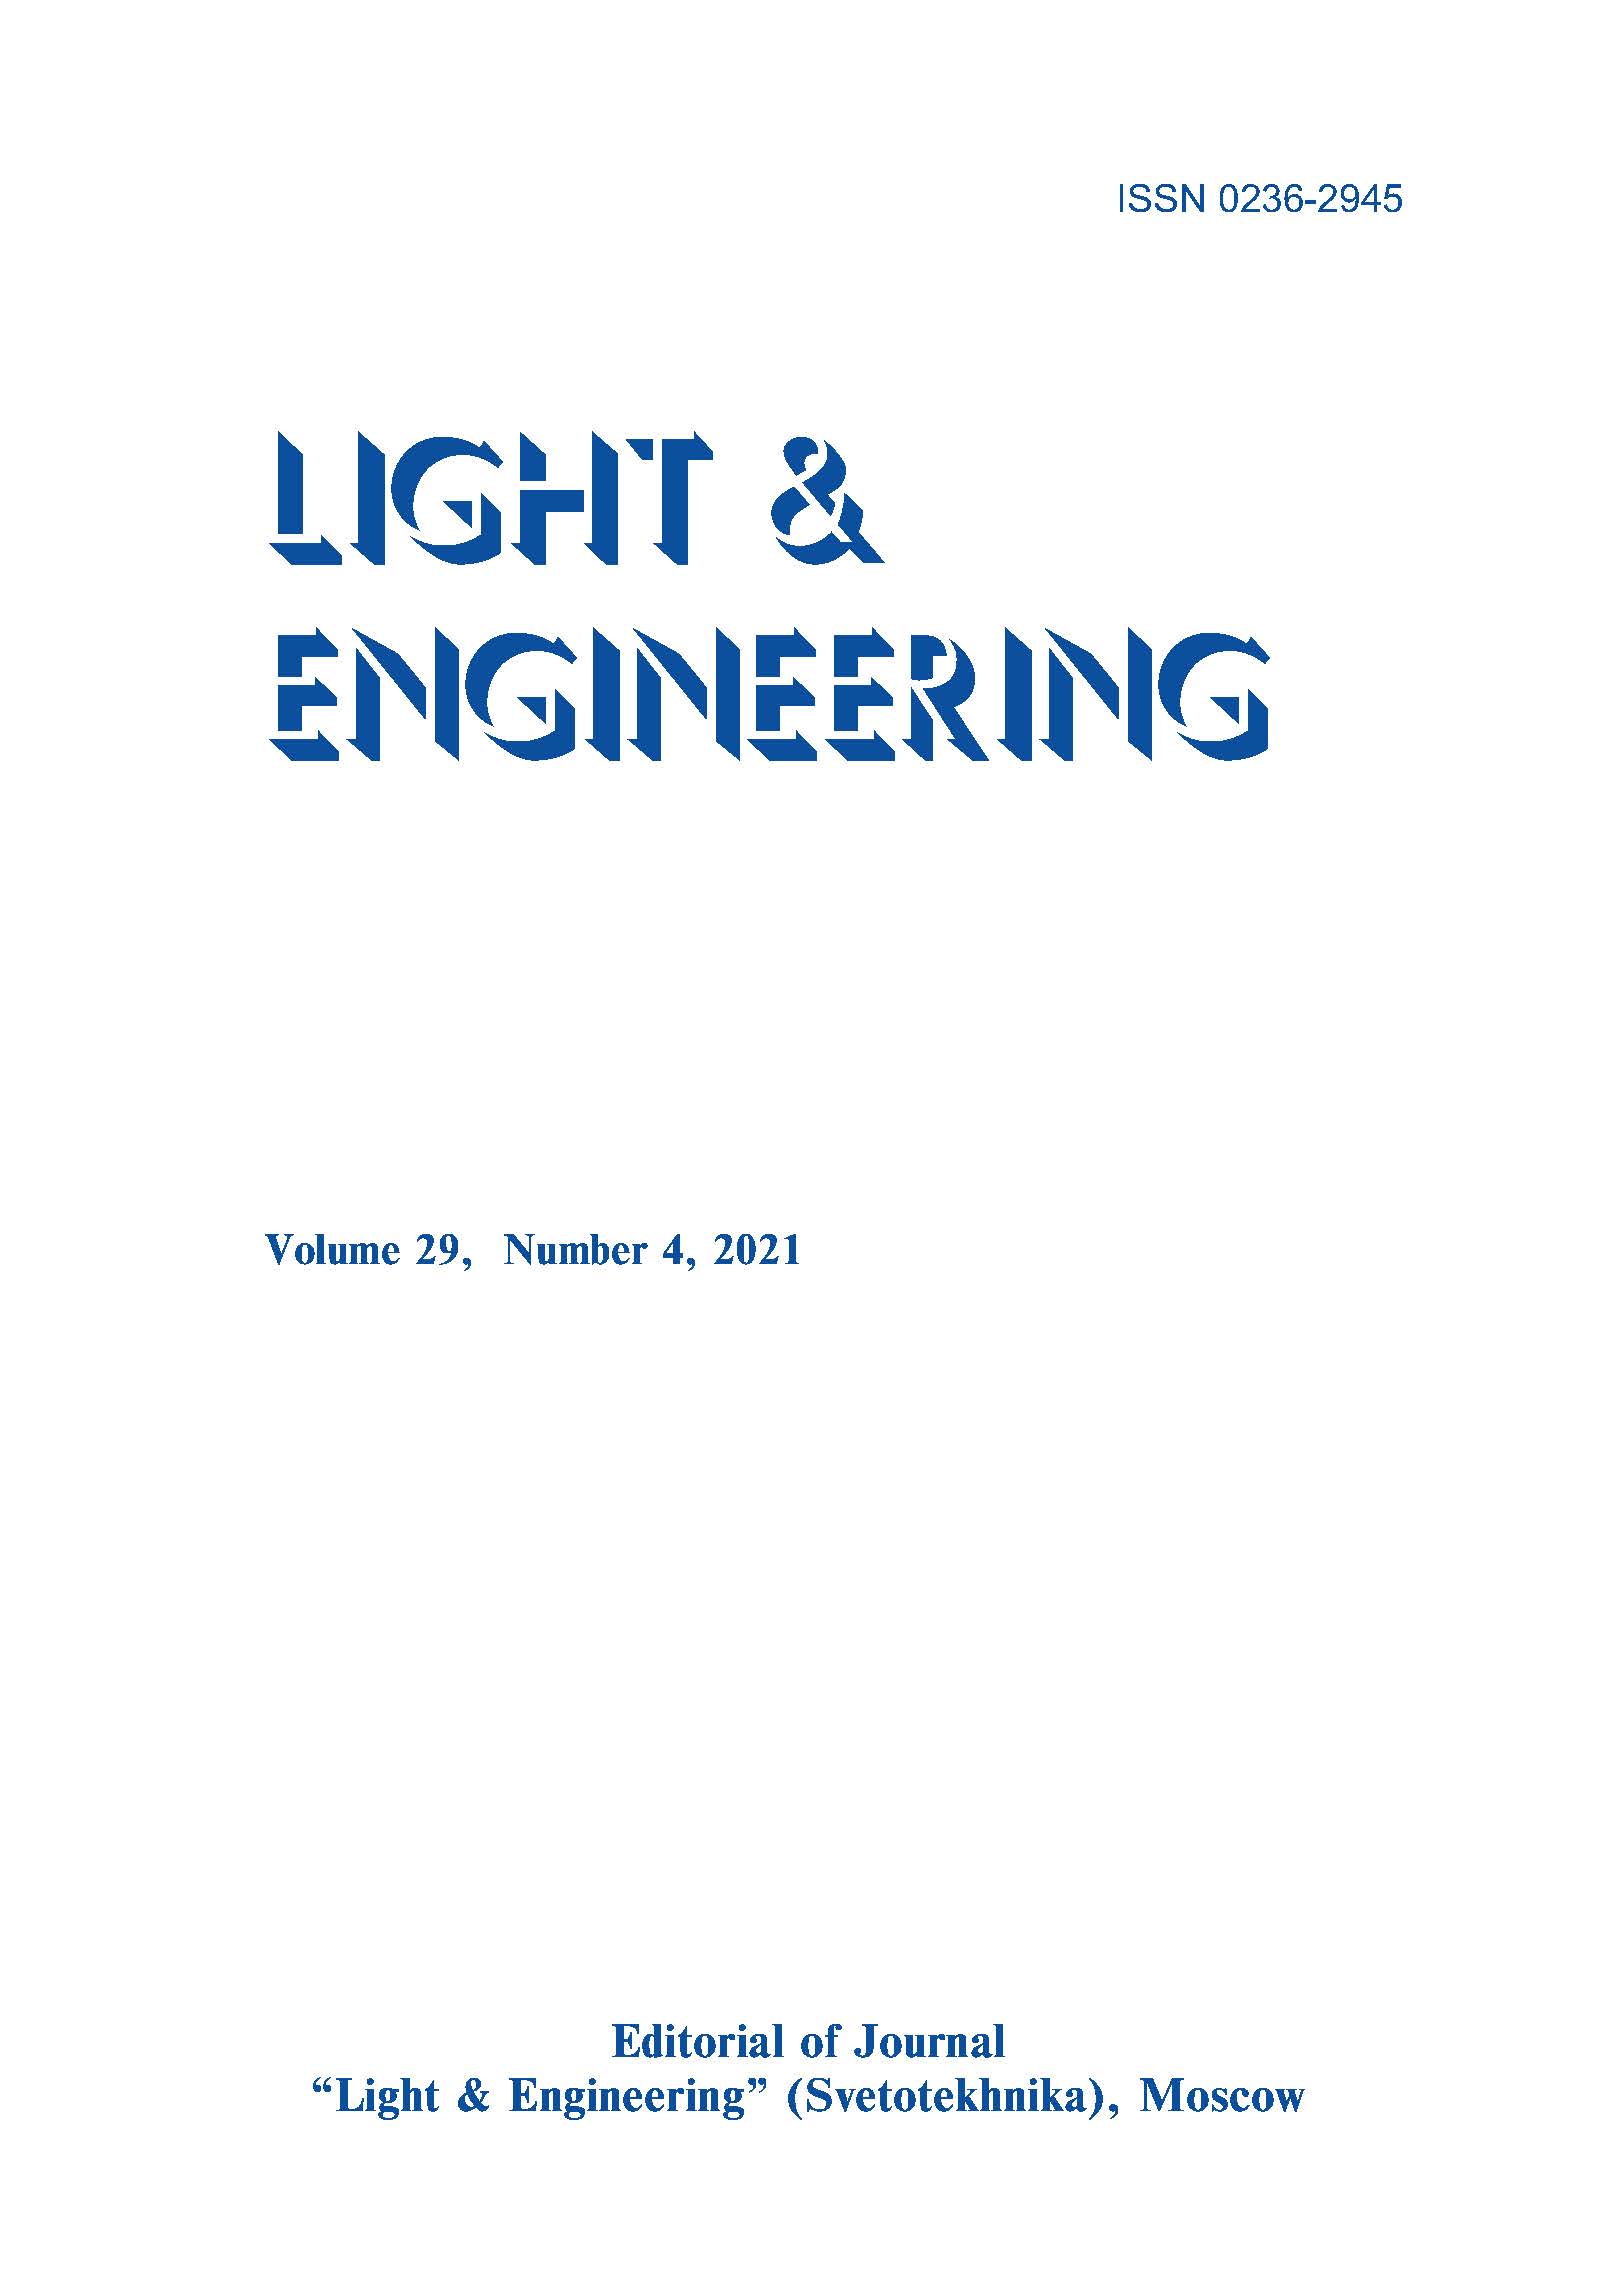 The Contribution of the Soviet “Kinetic” Art of the 1960s‑1970s to the Development of the Theory and Practice of Architectural Lighting Technology L&E, Vol. 29, No. 4, 2021